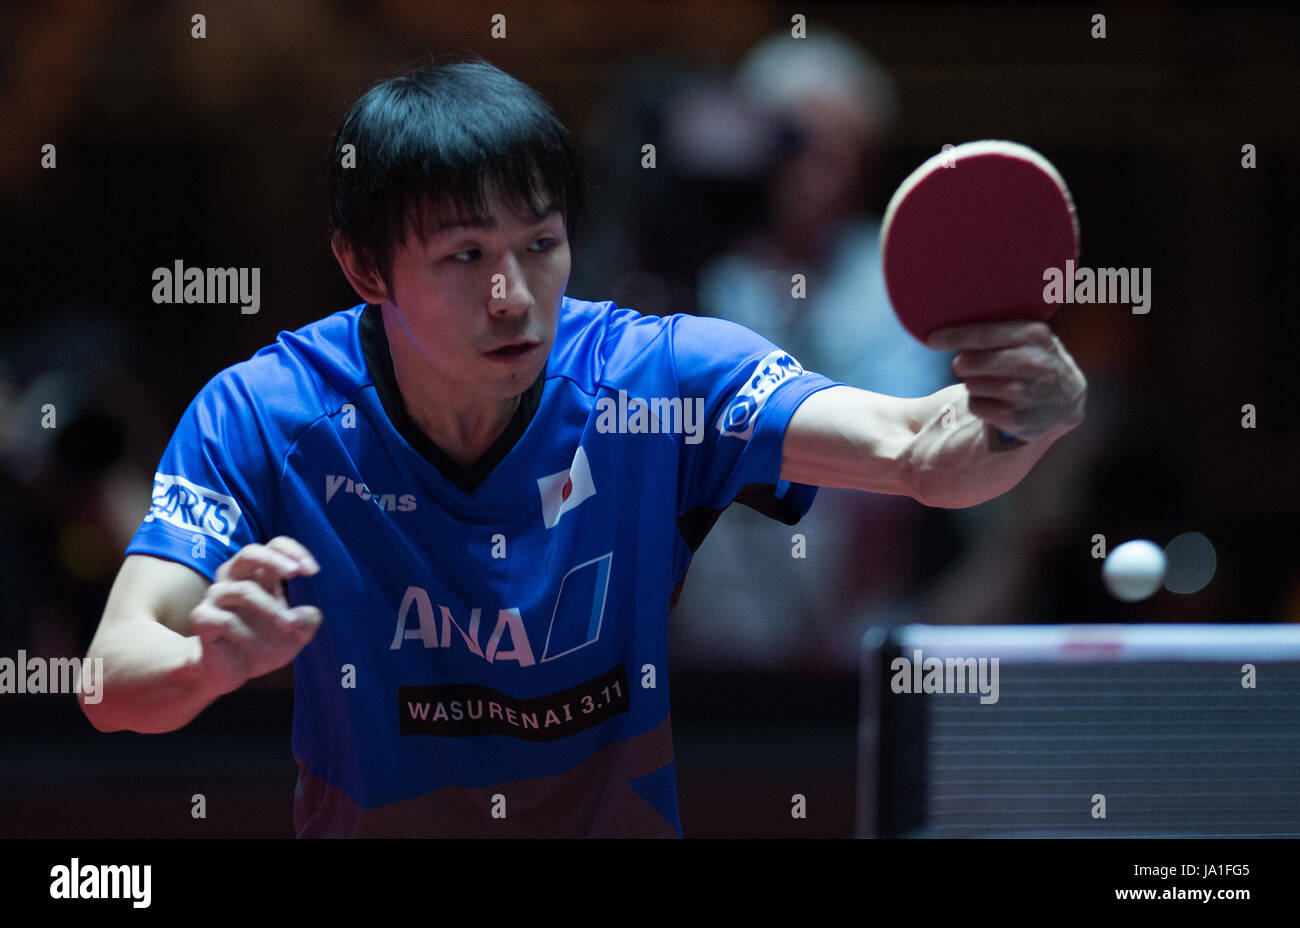 Duesseldorf, Germany. 4th June, 2017. Koki Niwa (Japan) in action against Ovtcharov (Germany) during the men's single round of sixteen at the Table Tennis World Championship in Duesseldorf, Germany, 4 June 2017. Photo: Jonas Güttler/dpa/Alamy Live News Stock Photo